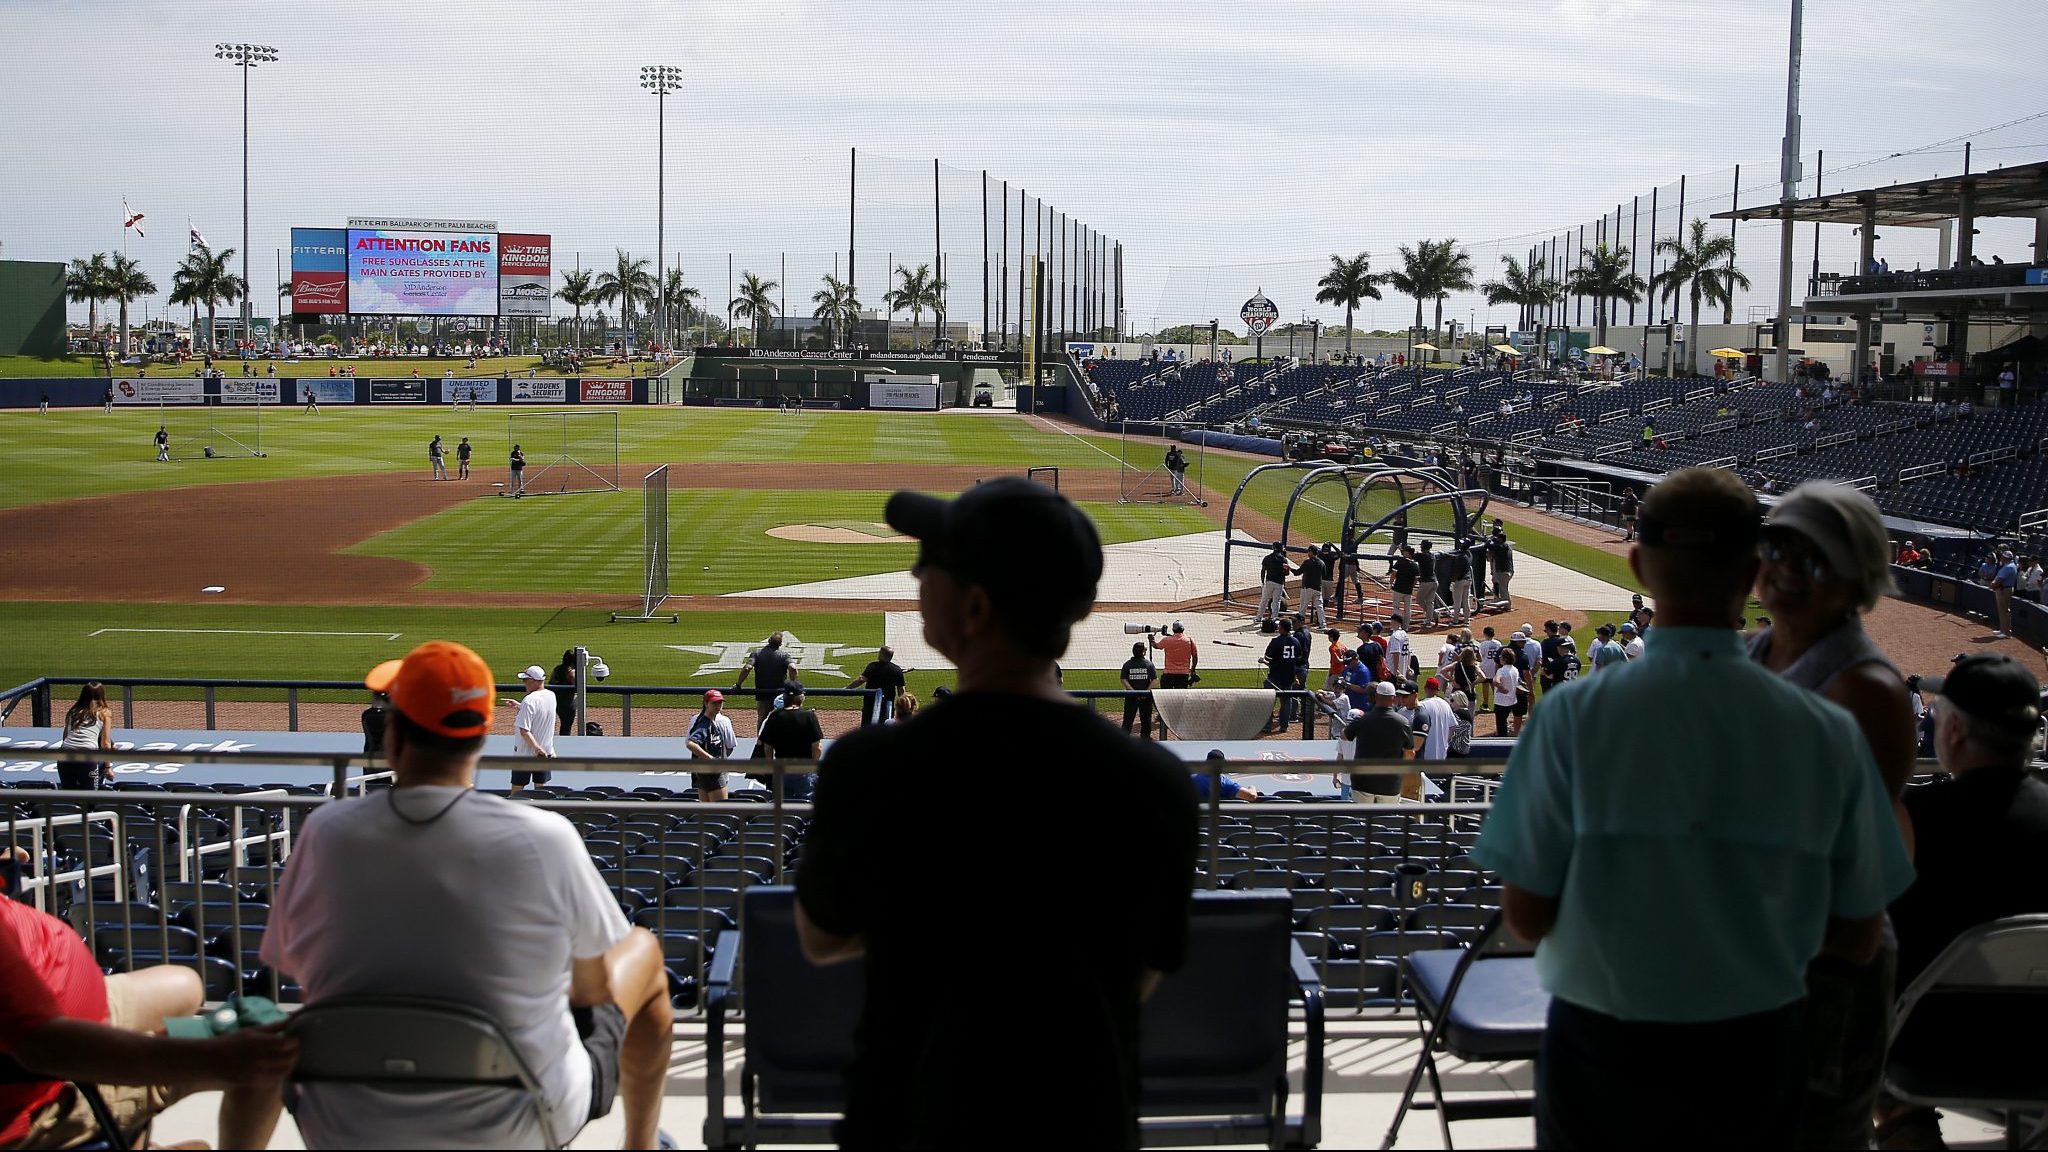 WEST PALM BEACH, FLORIDA - MARCH 12: Fans looks on during batting practice prior to a Grapefruit League spring training game between the Washington Nationals and the New York Yankees at FITTEAM Ballpark of The Palm Beaches on March 12, 2020 in West Palm Beach, Florida. Many professional and college sports are canceling or postponing their games due to the ongoing threat of the Coronavirus (COVID-19) outbreak.